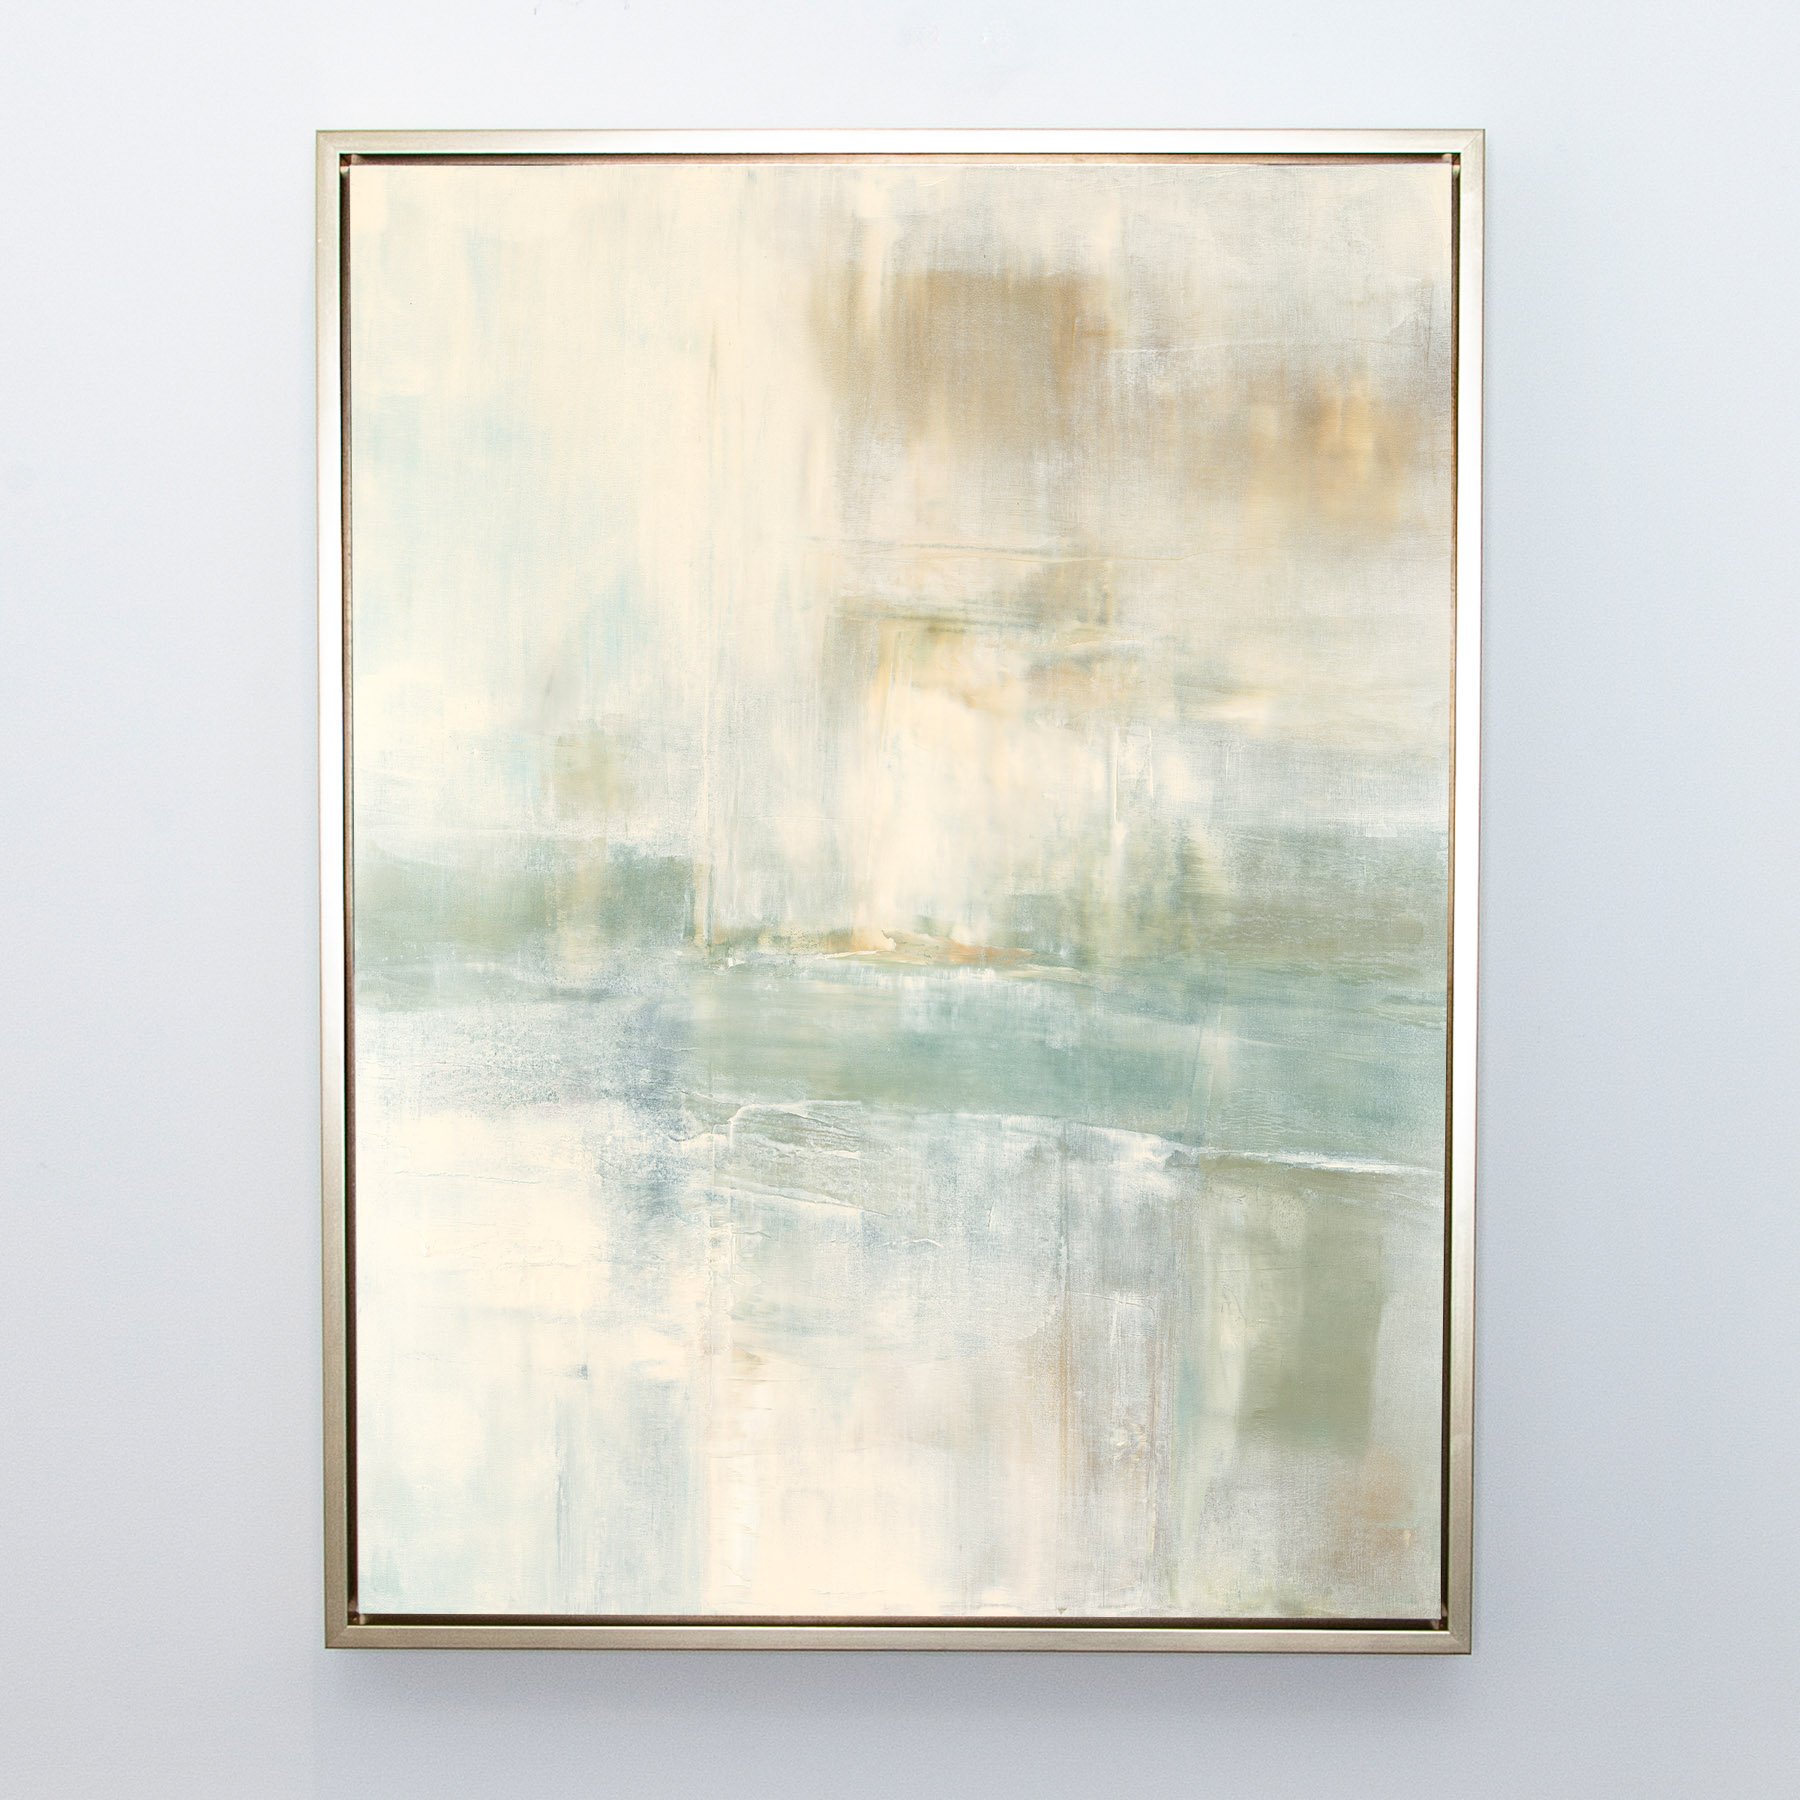 Tahoe - 45 inches by 60 inches vertical in champagne gold frame - by Carol Benson-Cobb